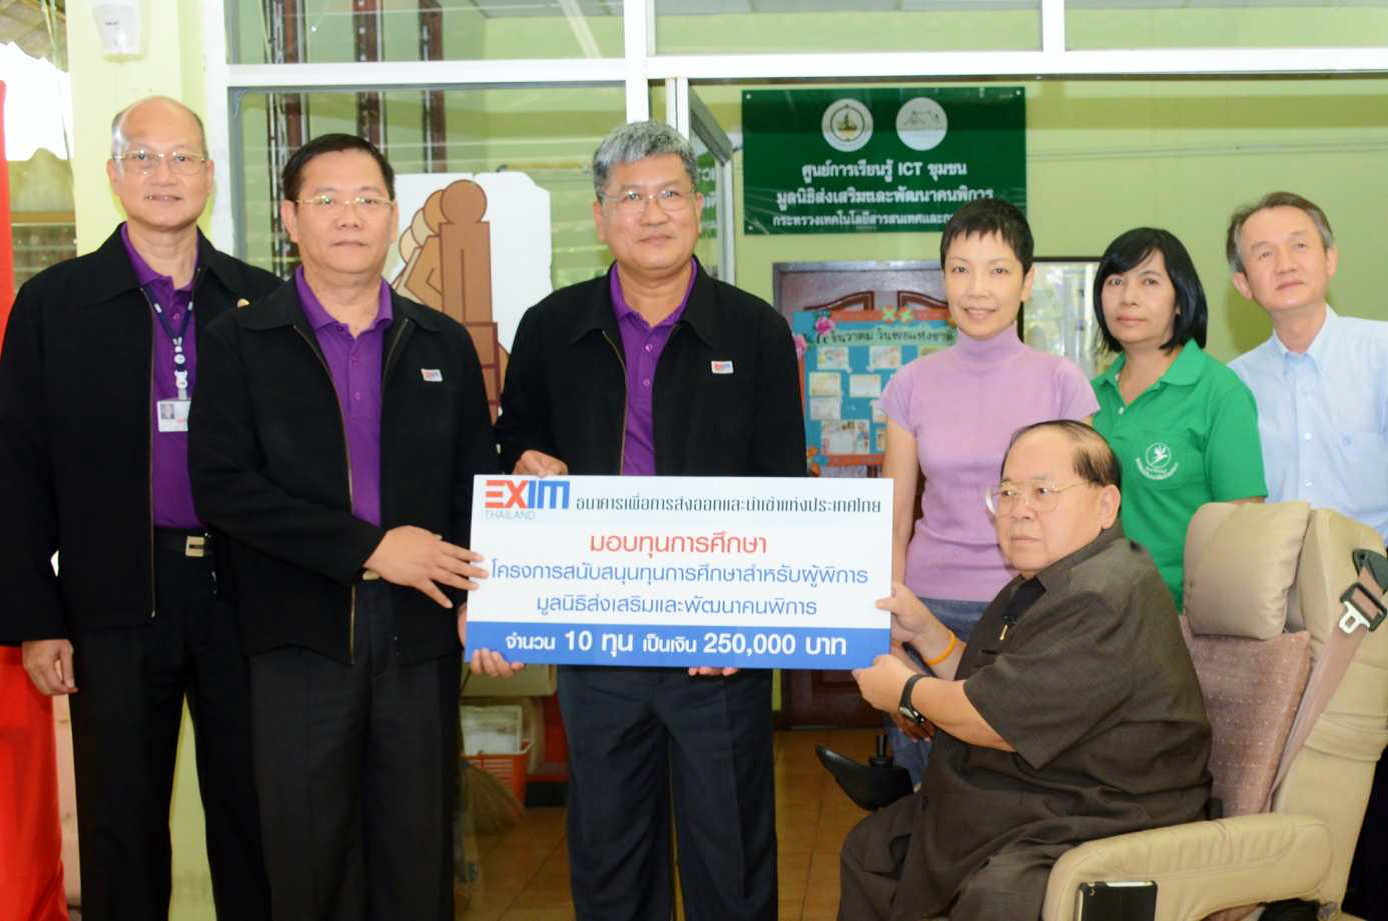 EXIM Thailand Sponsors Scholarships for the Disabled at Foundation for Support and Development of Disabled Persons in Nonthaburi